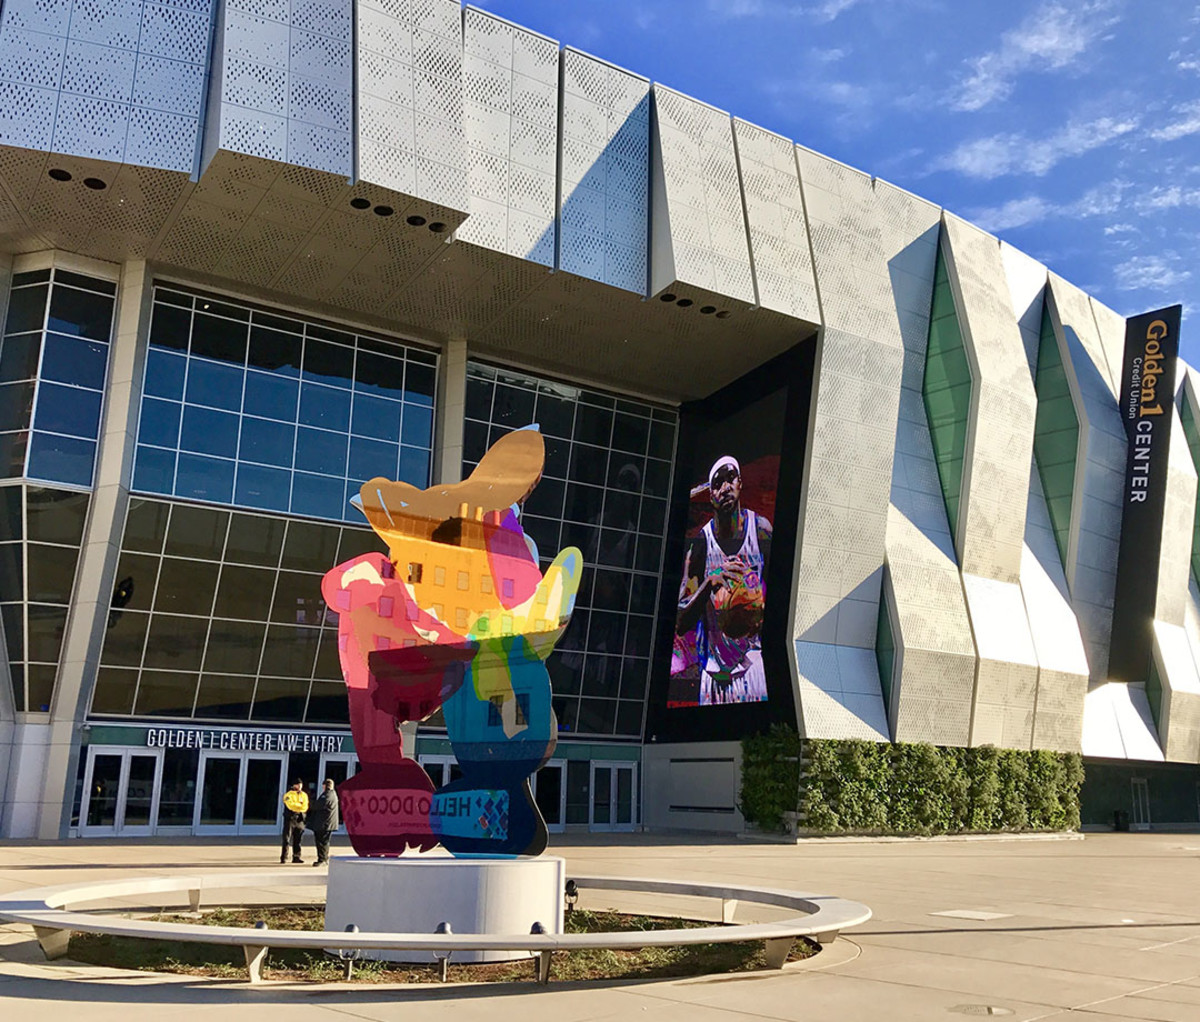 The Jeff Koons sculpture in front of the Golden 1 Center arena